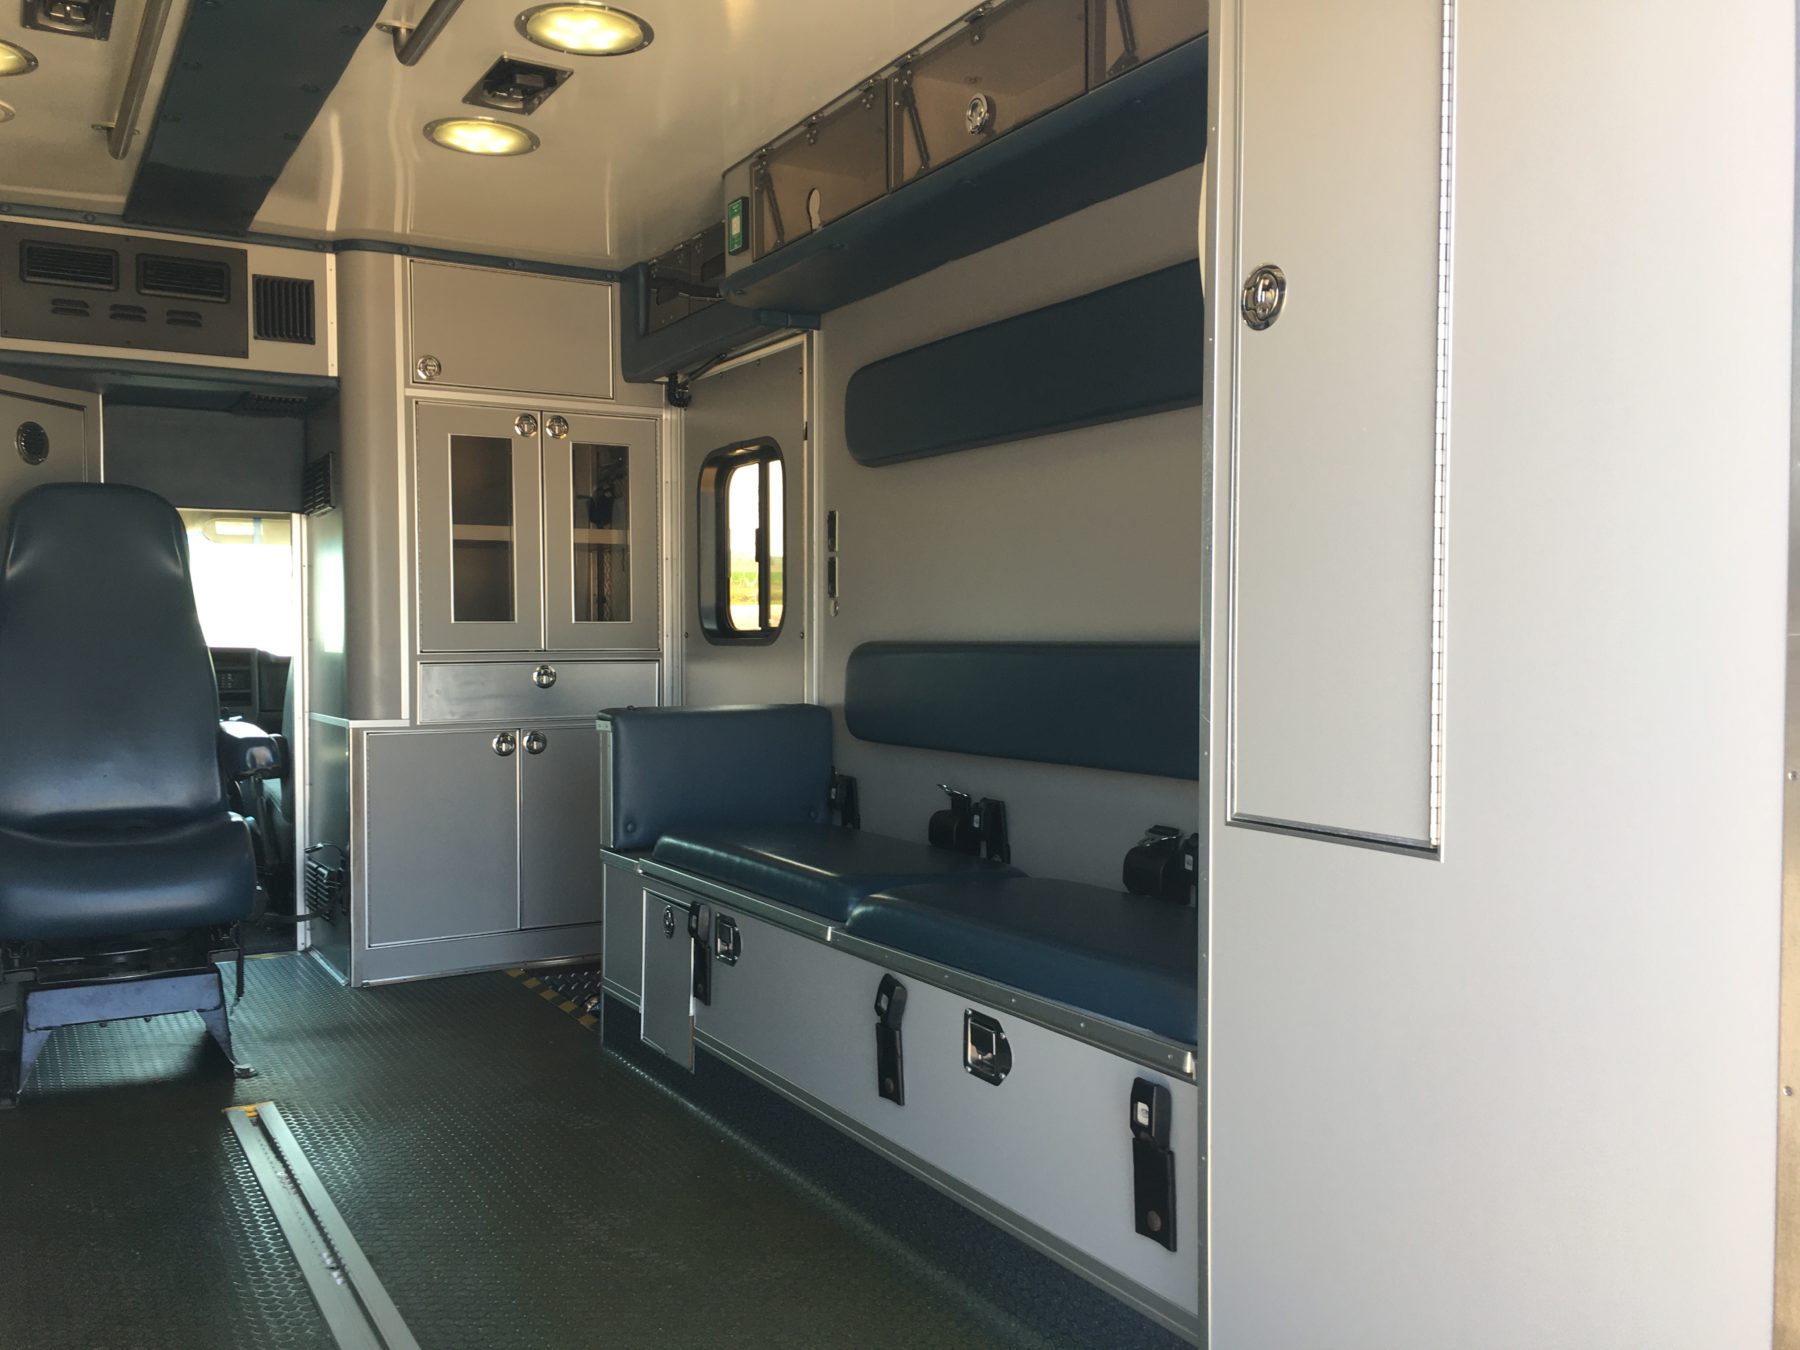 2010 Chevrolet 4500 Type 3 Ambulance For Sale – Picture 7